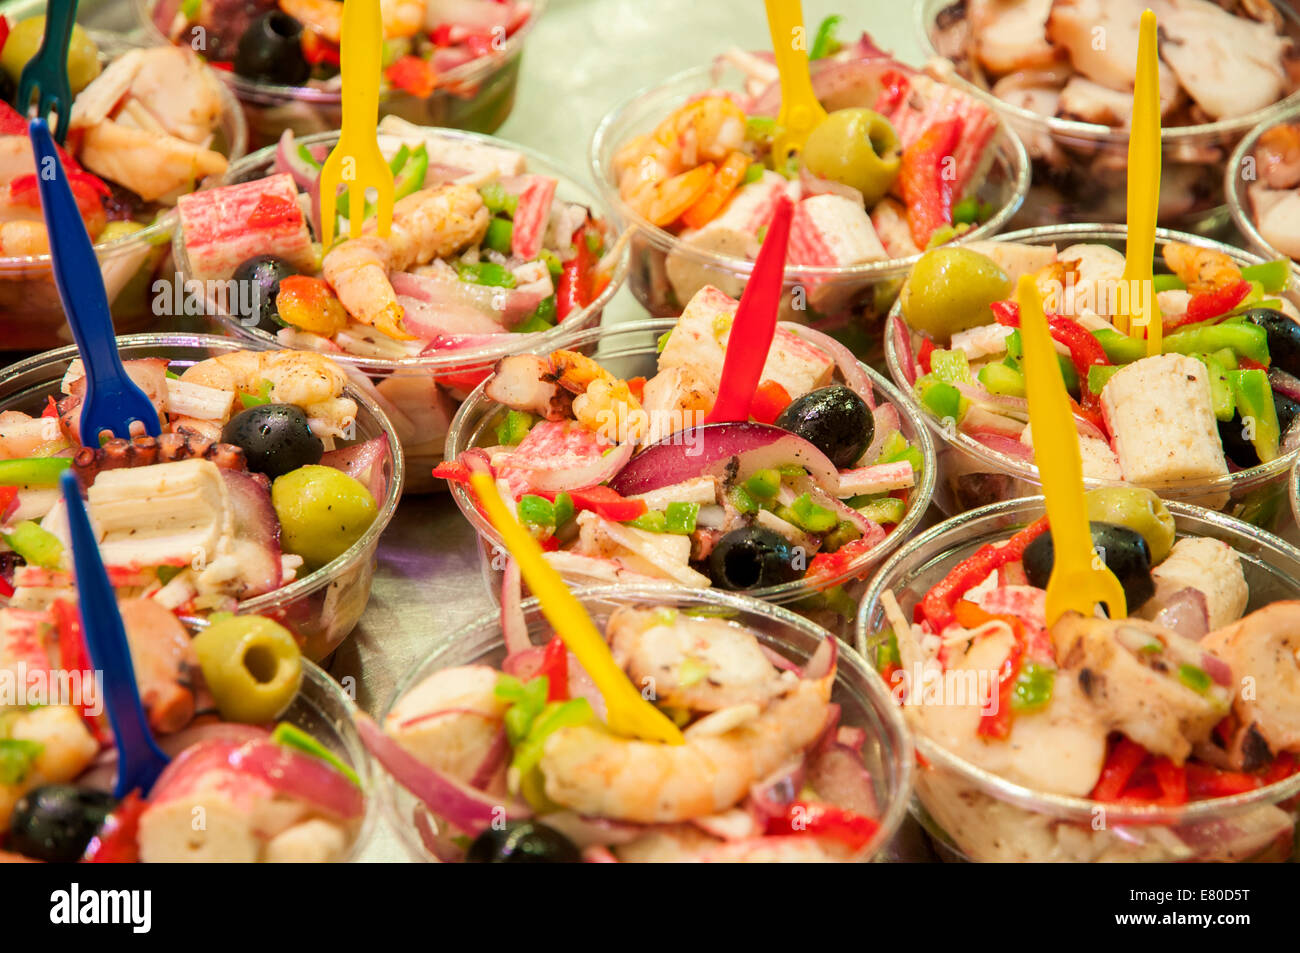 full glass of fruits, olives and shrimp prepared to eat Stock Photo